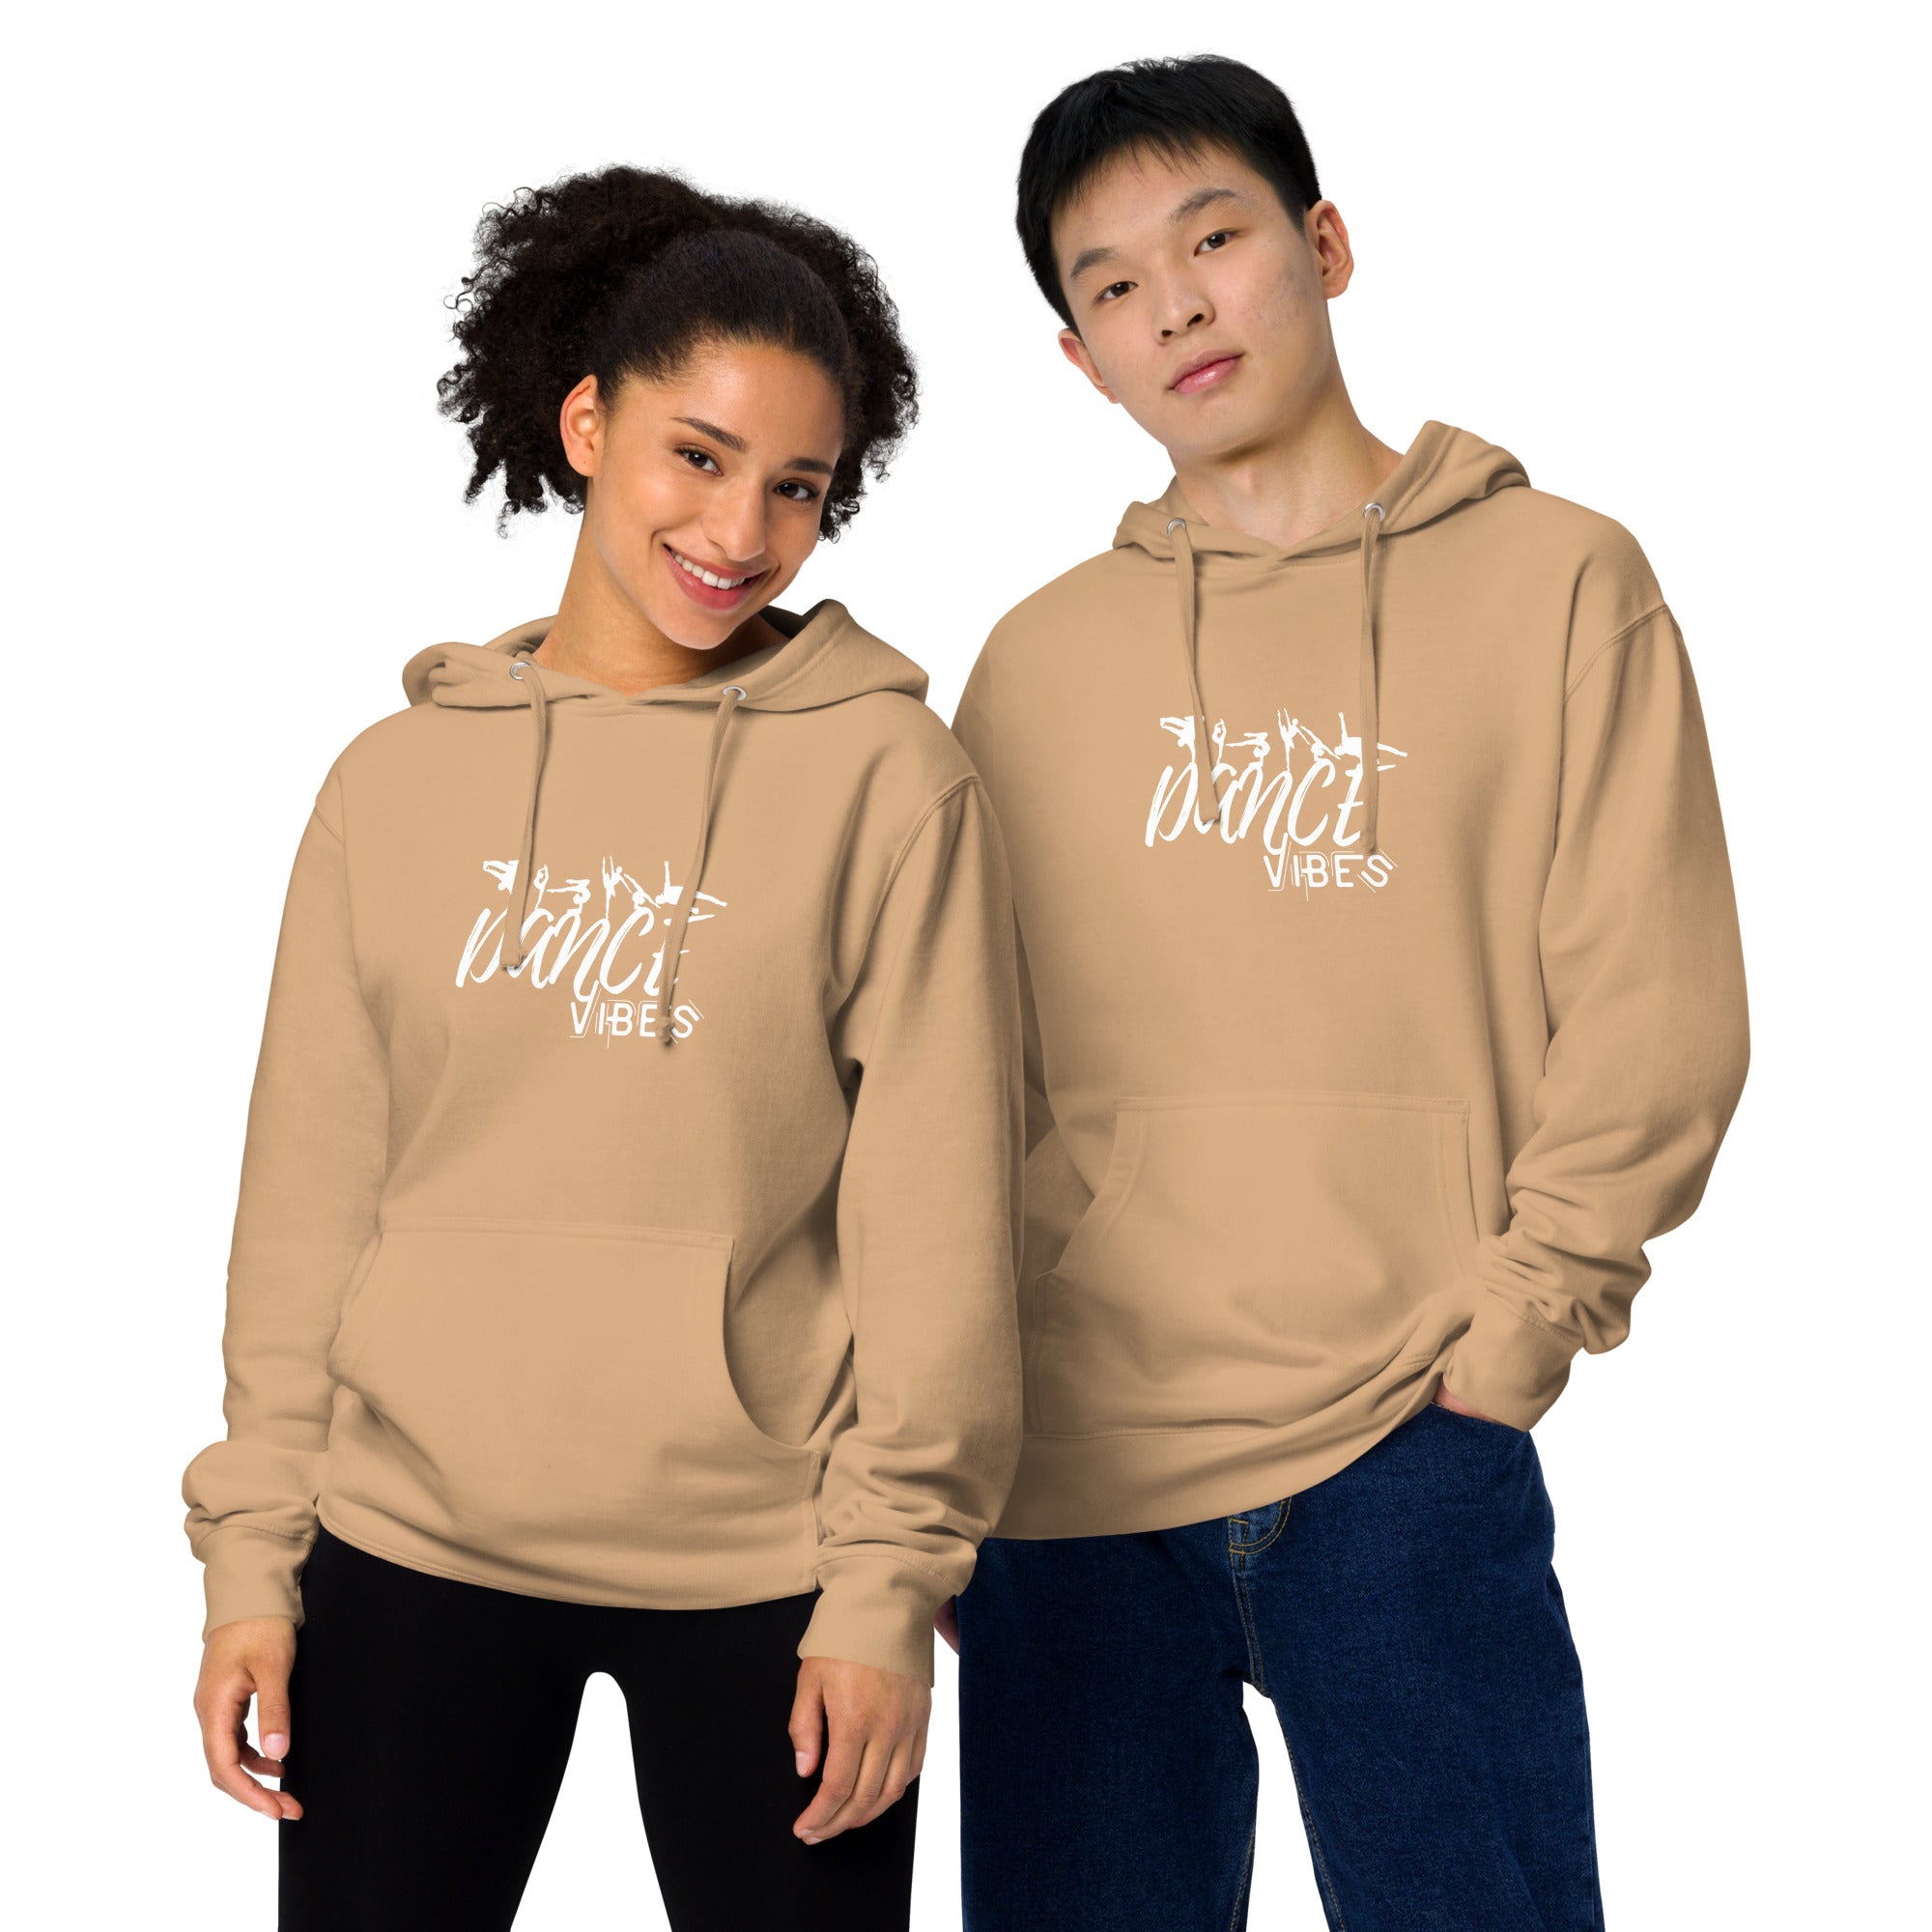 Dance Vibes Unisex midweight hoodie